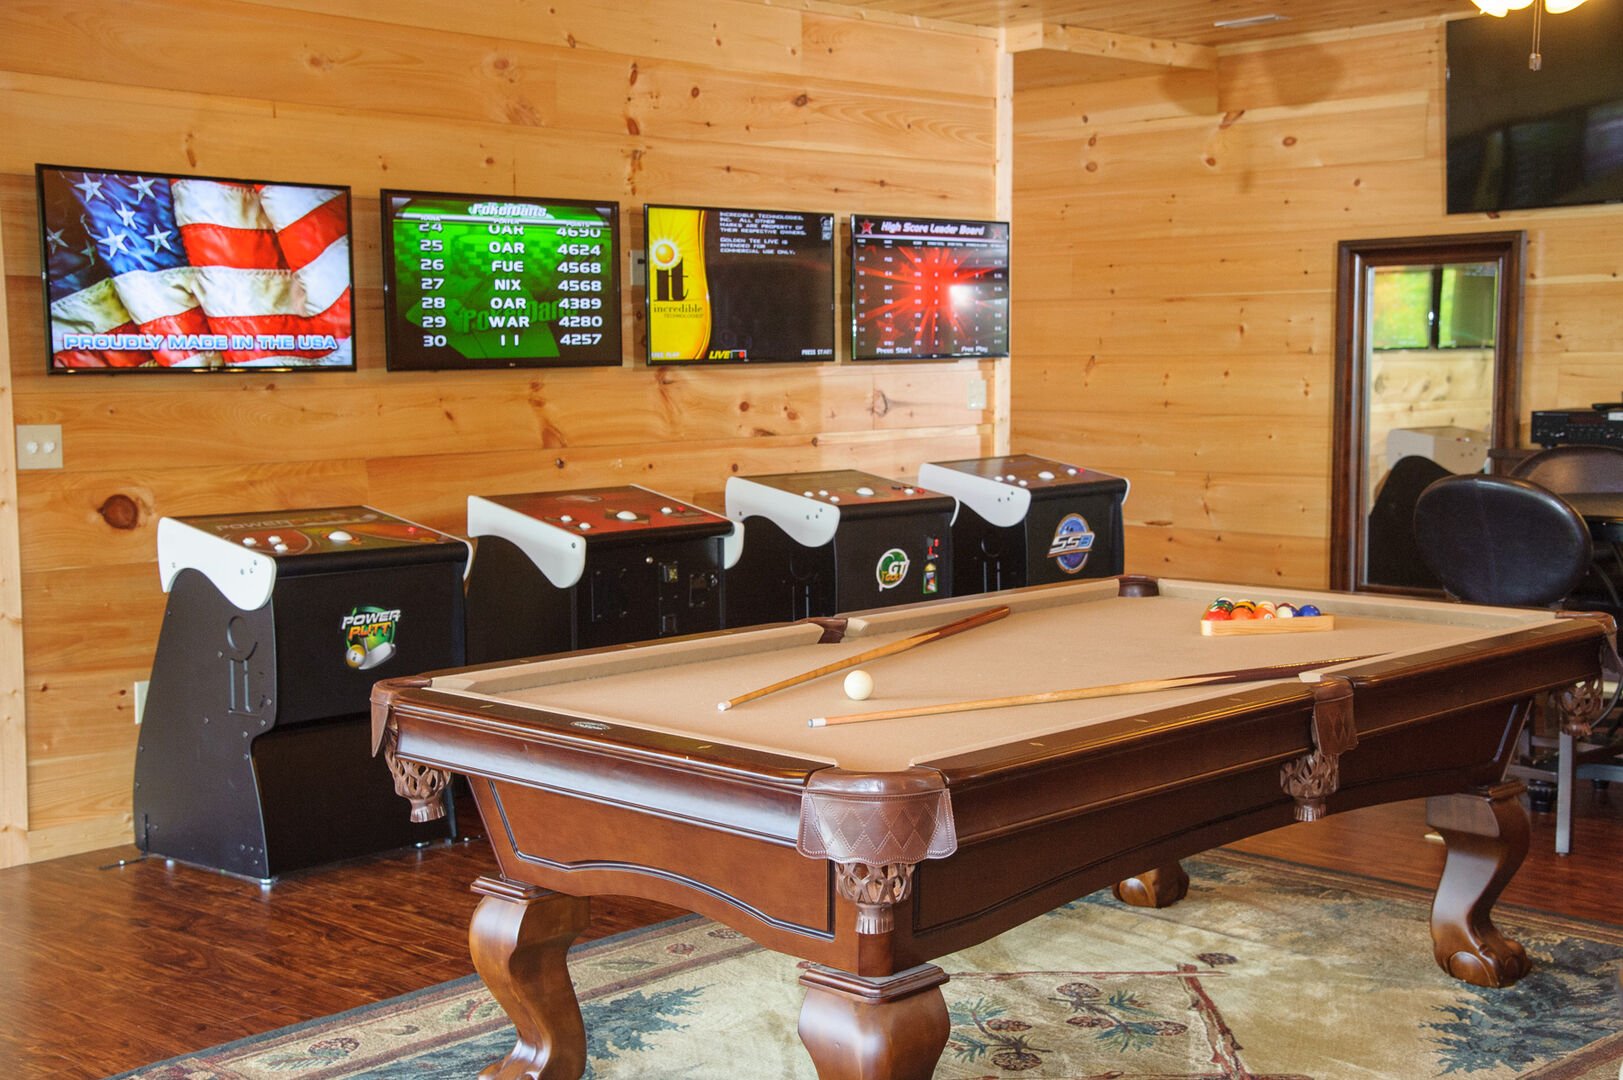 Pool table in front of arcade cabinets with wall-mounted screens.